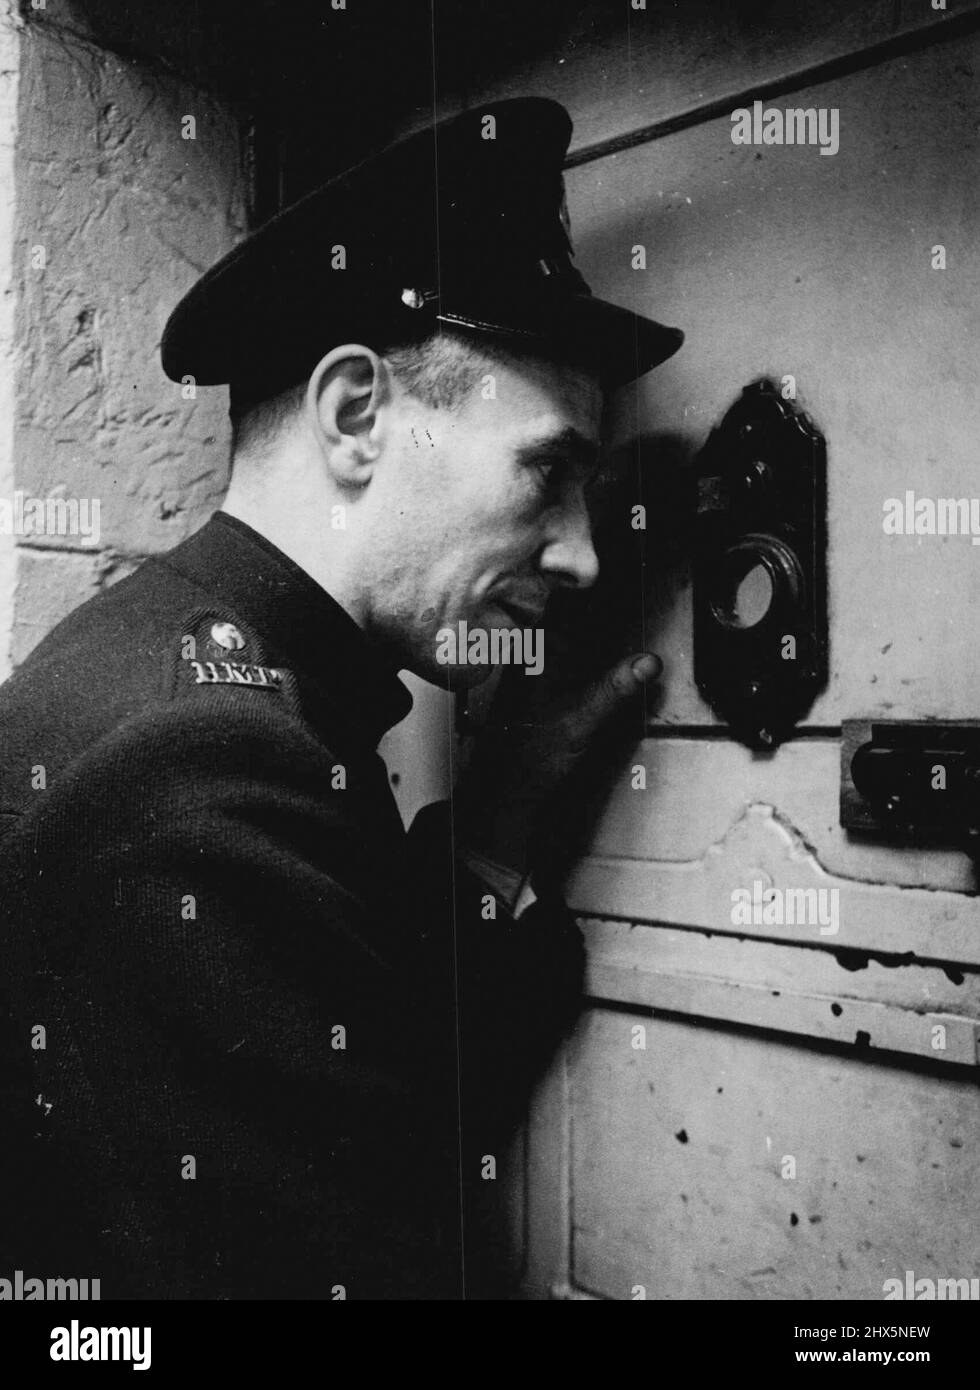 Prison Officer Davidson operates a peephole to keep tab on the prisoners in their cells. April 12, 1950. (Photo by Bert Hardy, Picture Post). Stock Photo